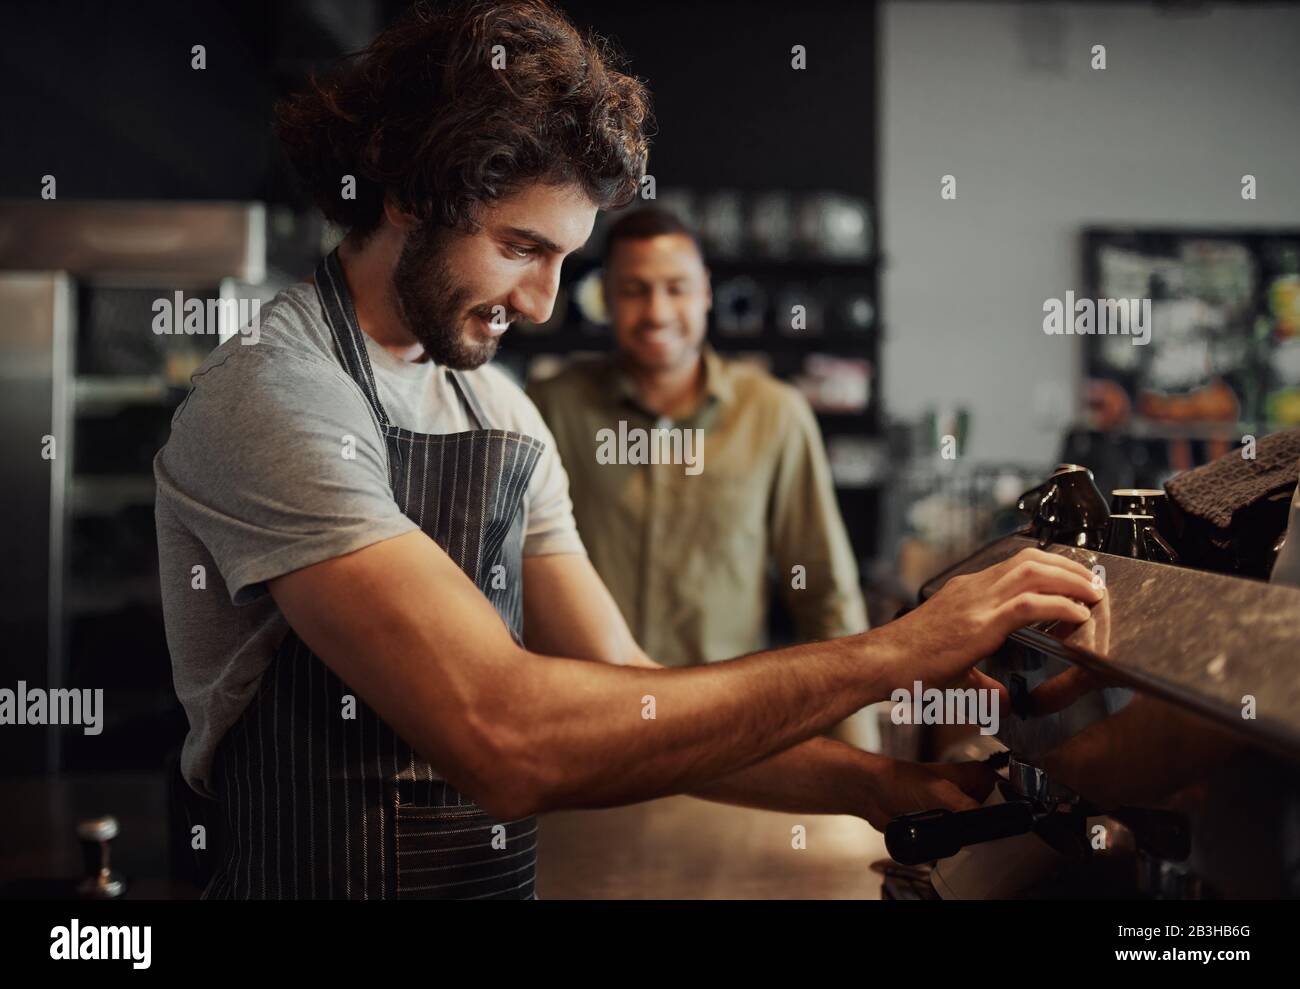 Handsome successful male worker making fresh coffee using machine while customer watching through counter Stock Photo